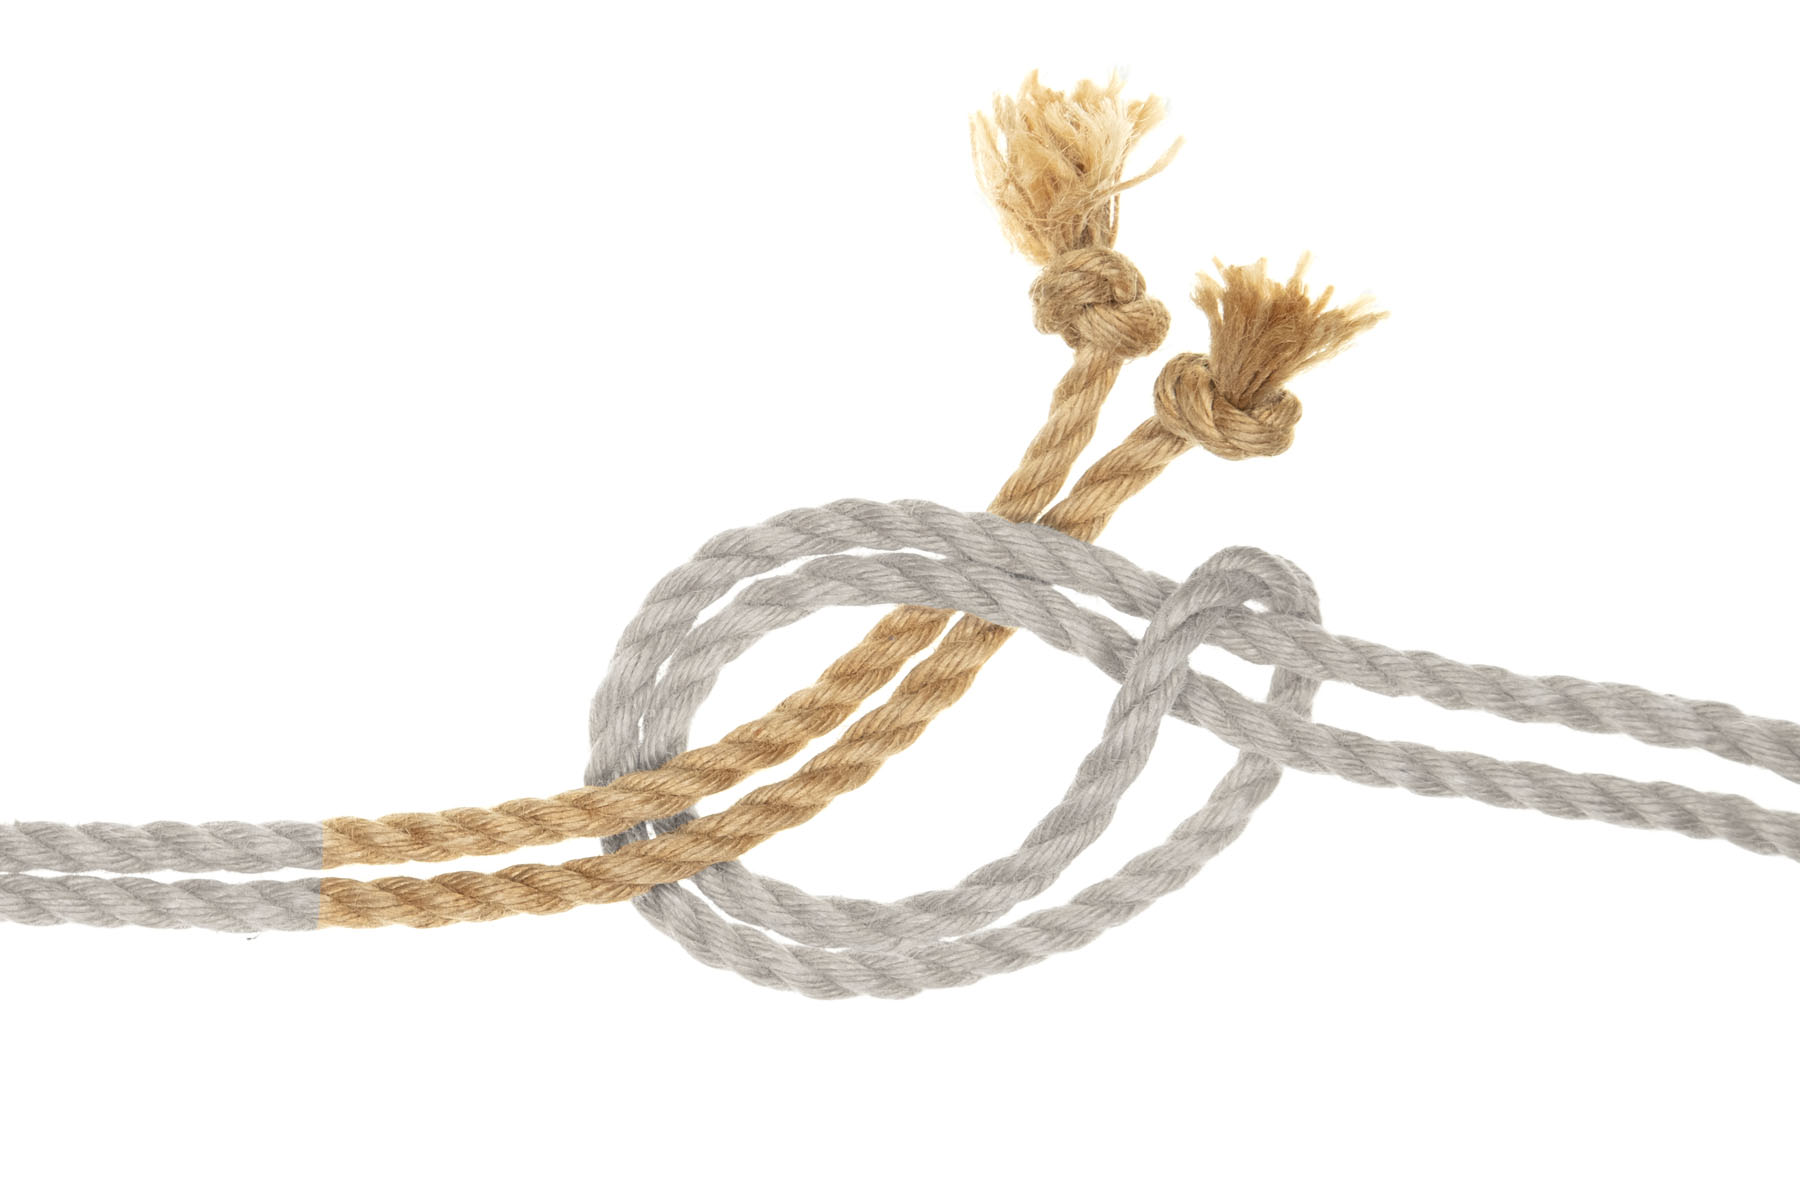 The two ends of the rope on the left have passed through the loop of the lark’s head.